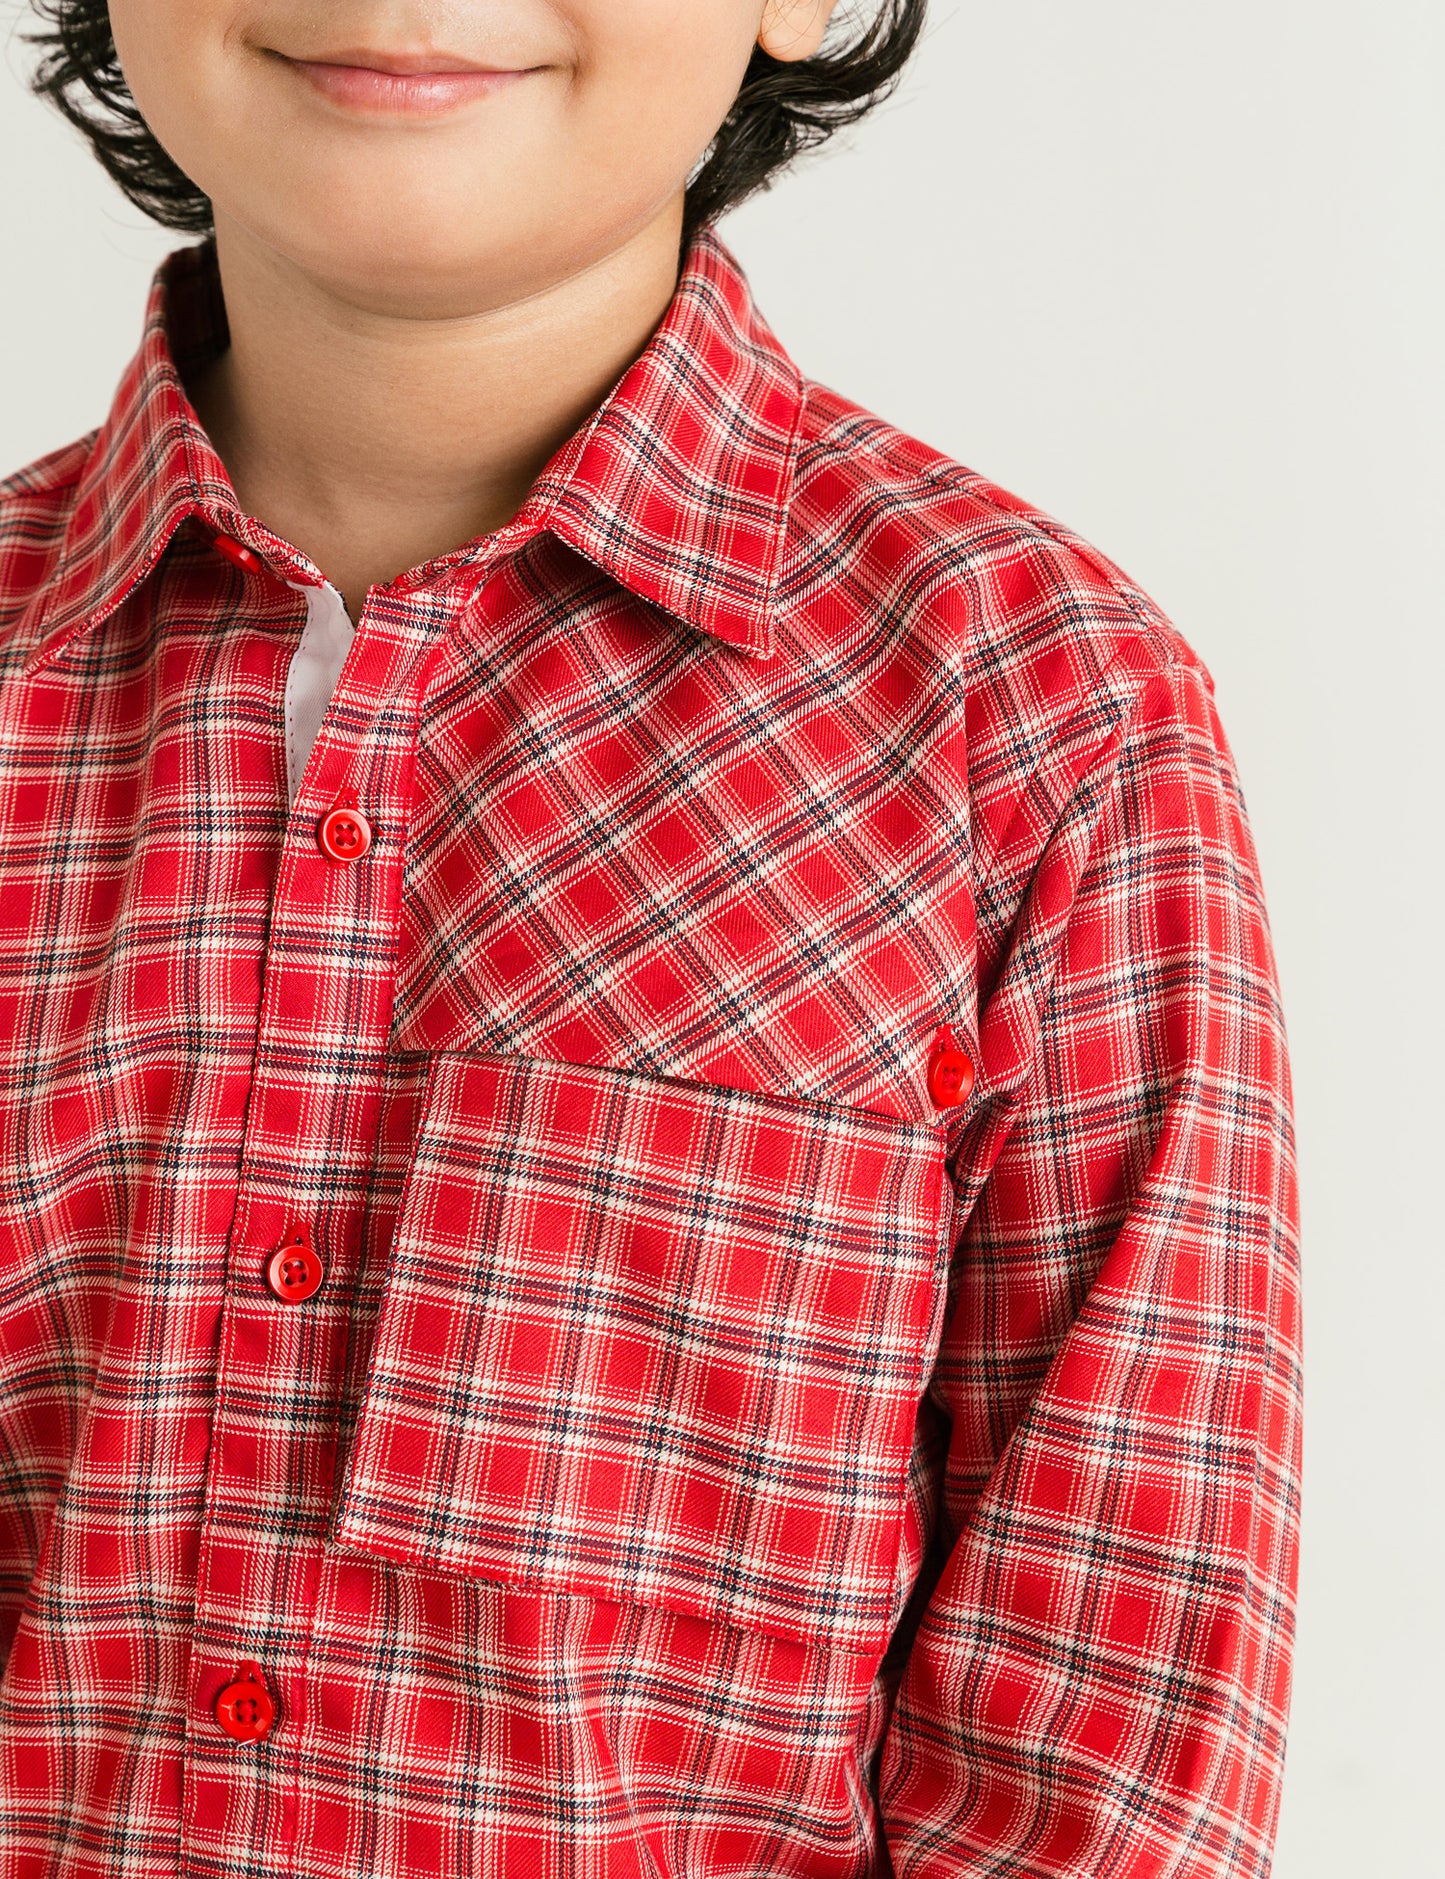 STYLISED BUTTON DOWN CHECK SHIRT